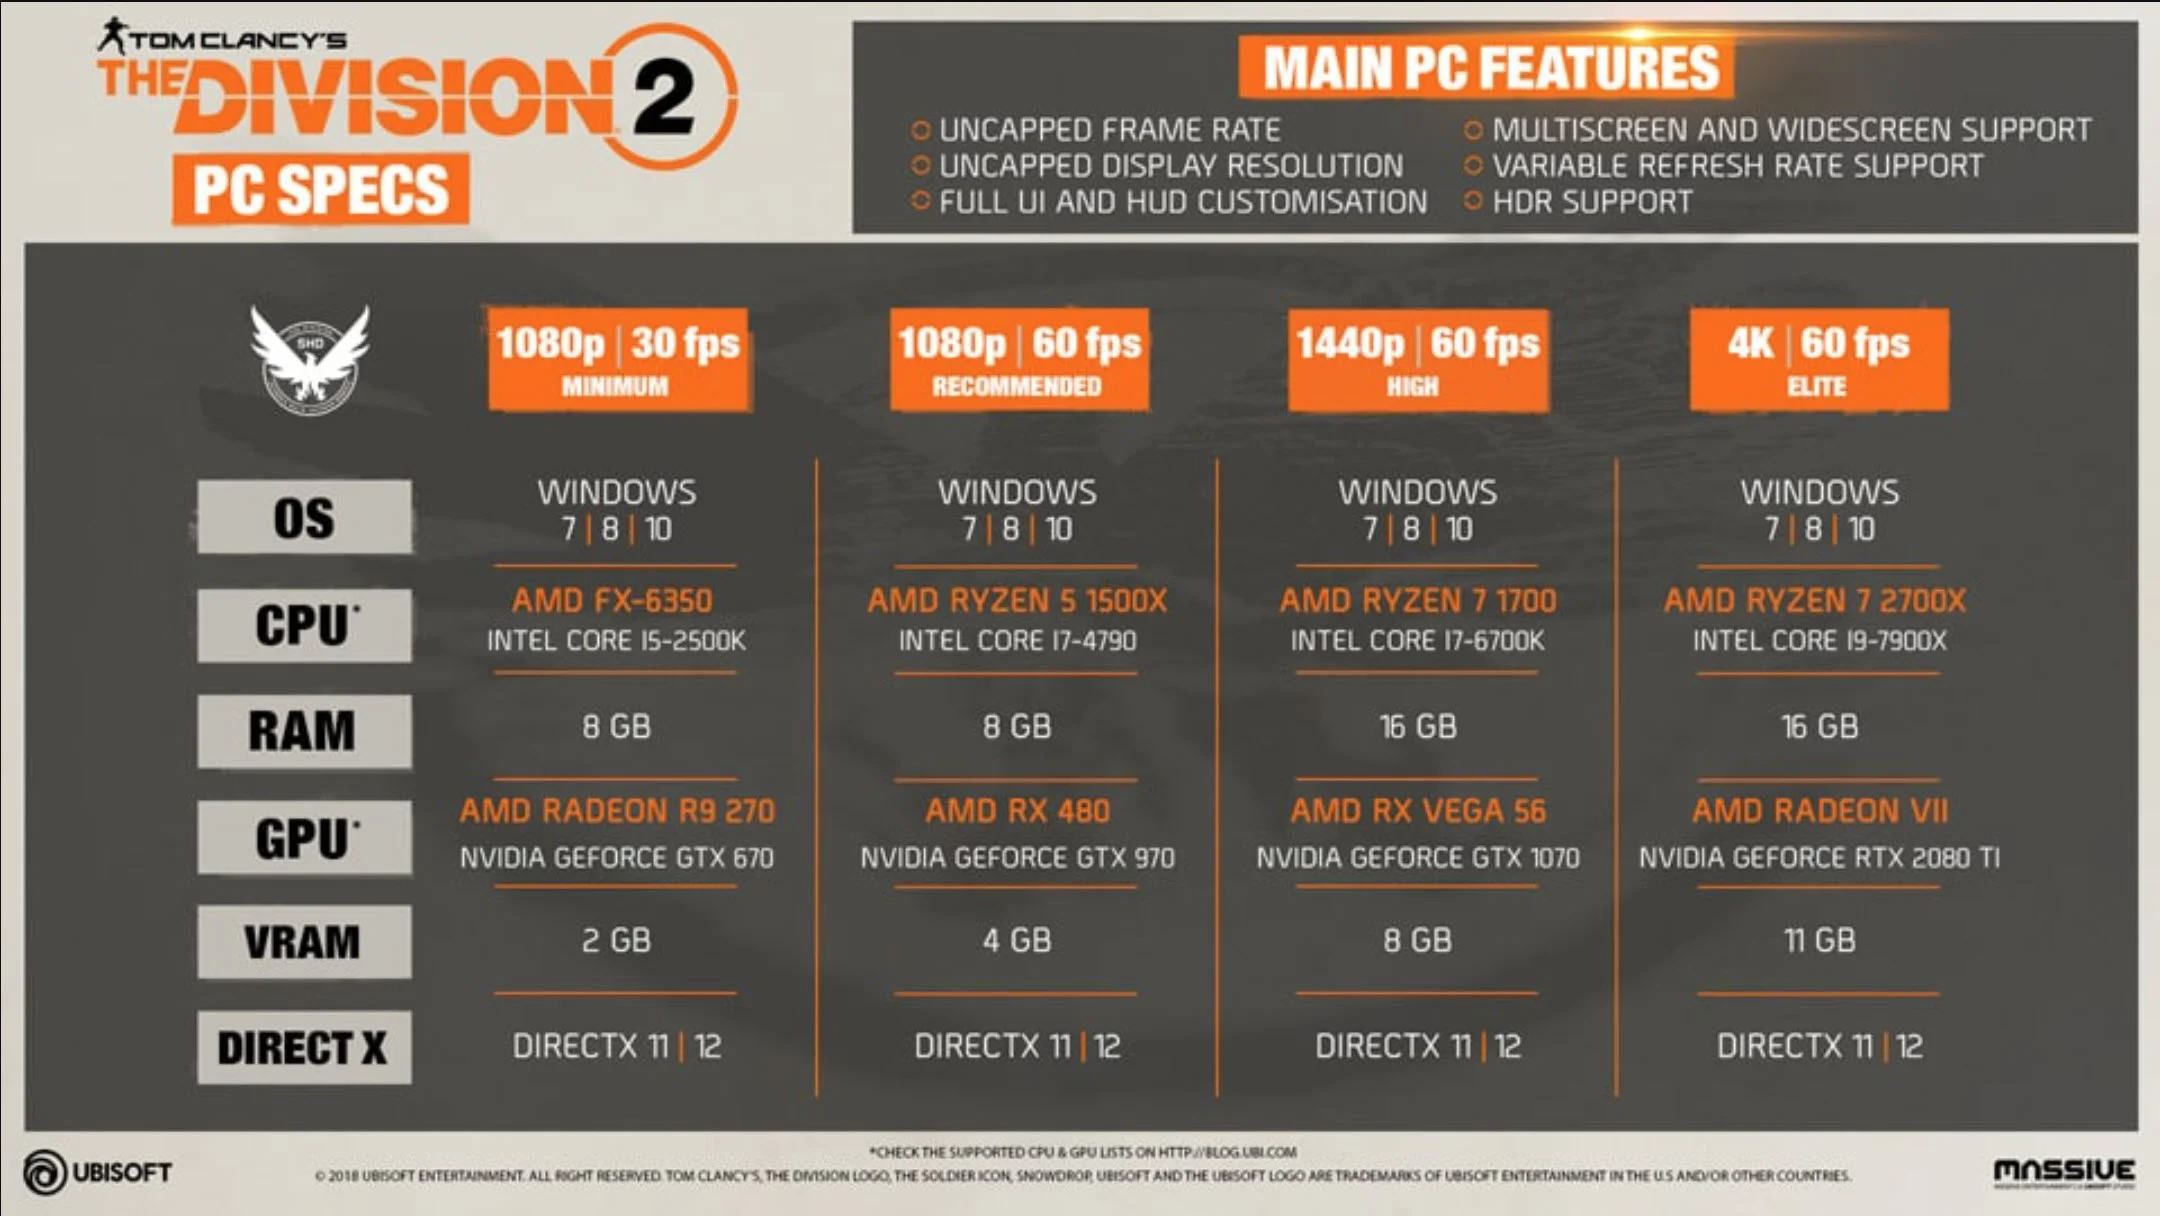 What are the system requirements for It Takes Two? - Gamepur